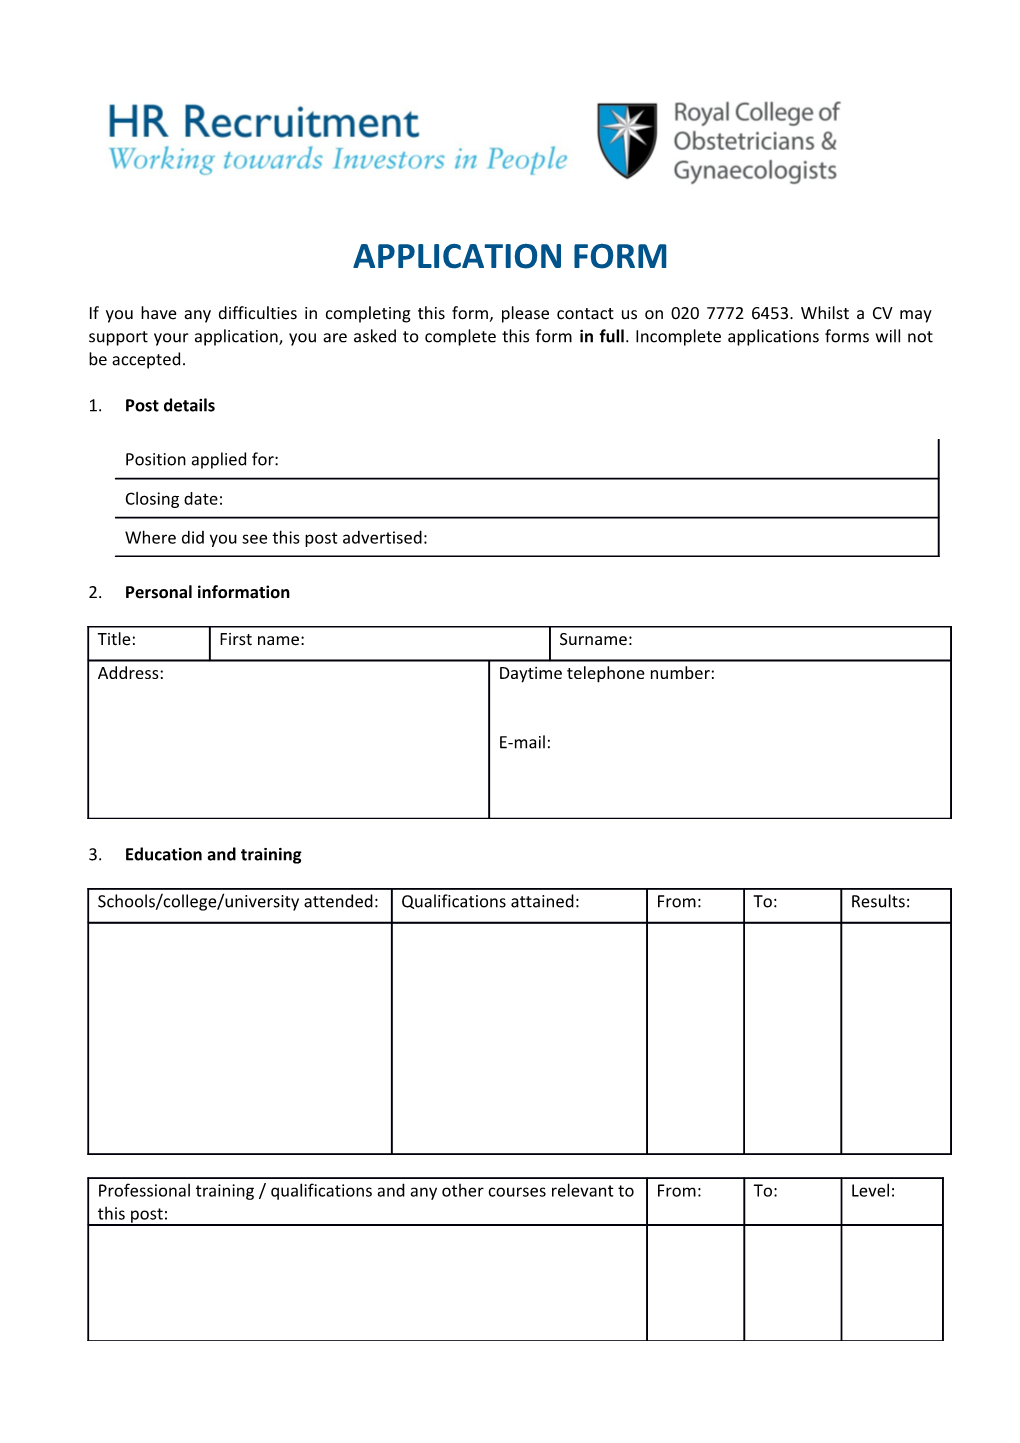 Application Form s100